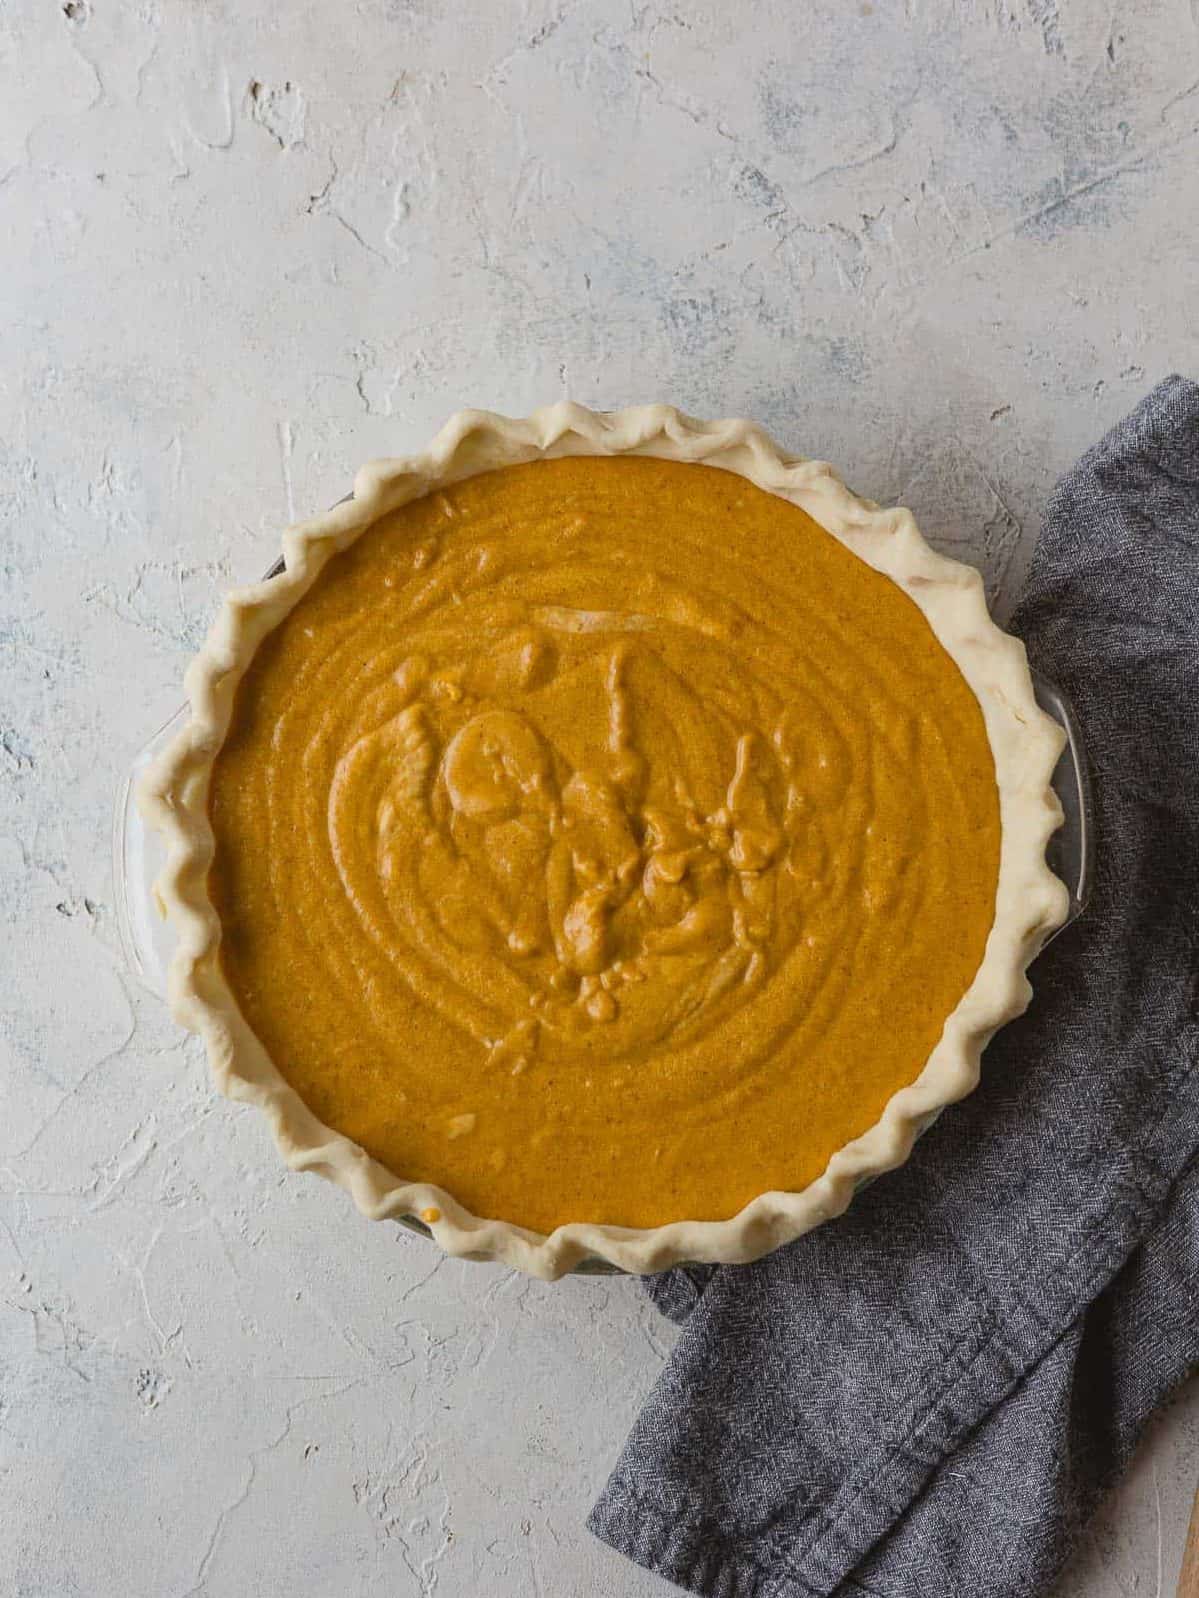 Pumpkin pie filling poured into an unbaked pie crust.